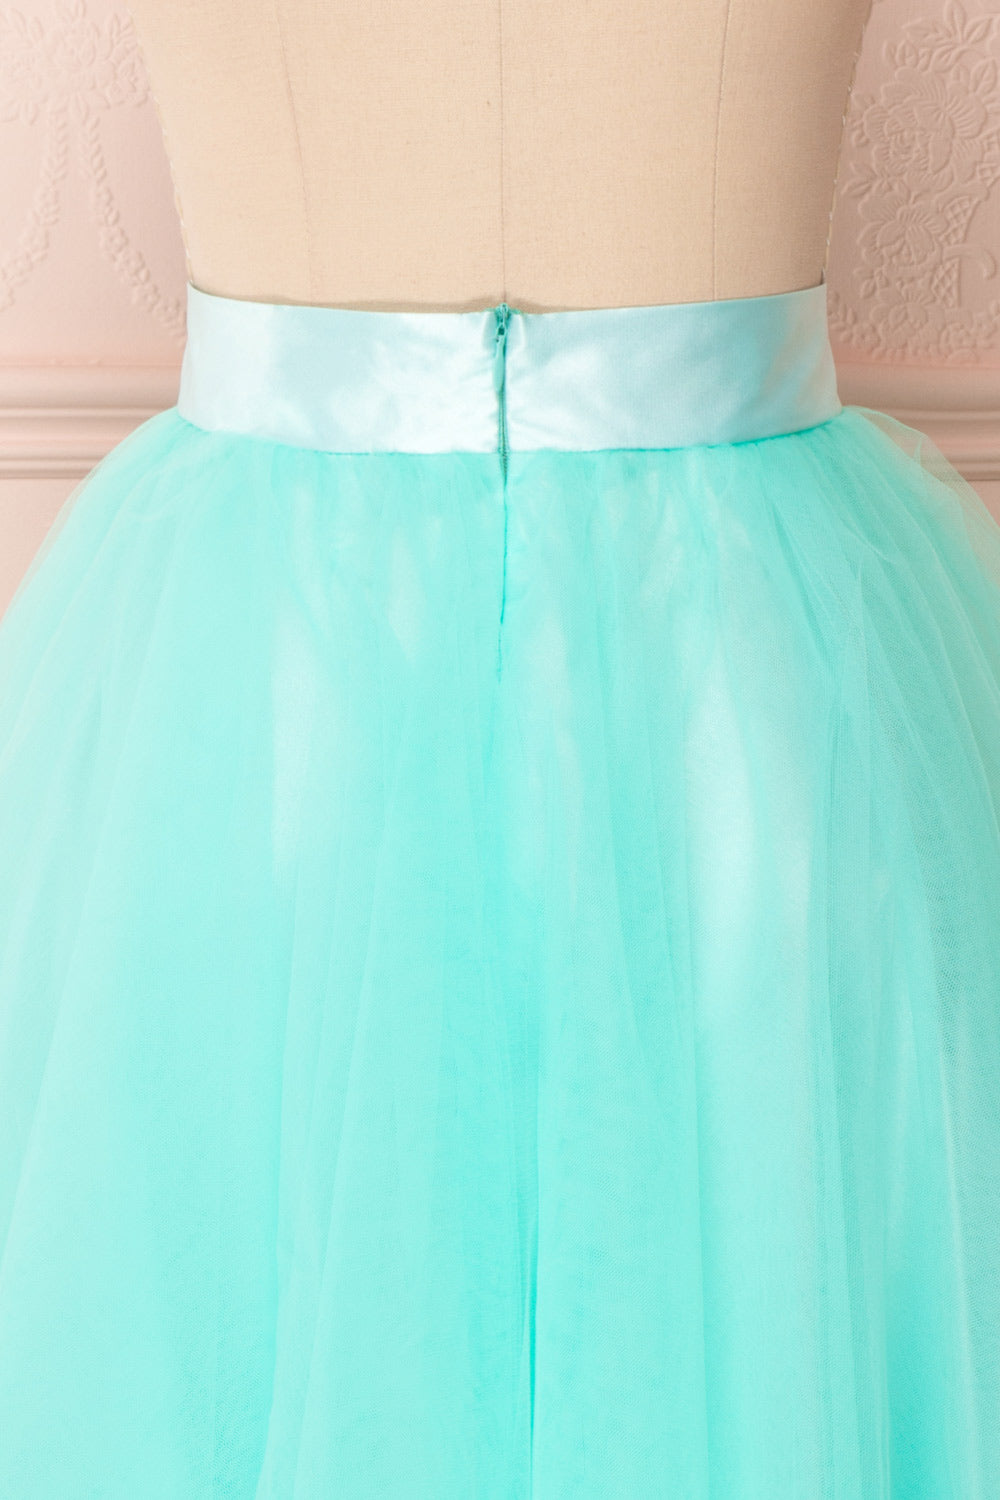 Julieth Menthe Light Turquoise Tulle Skirt | Boutique 1861 6